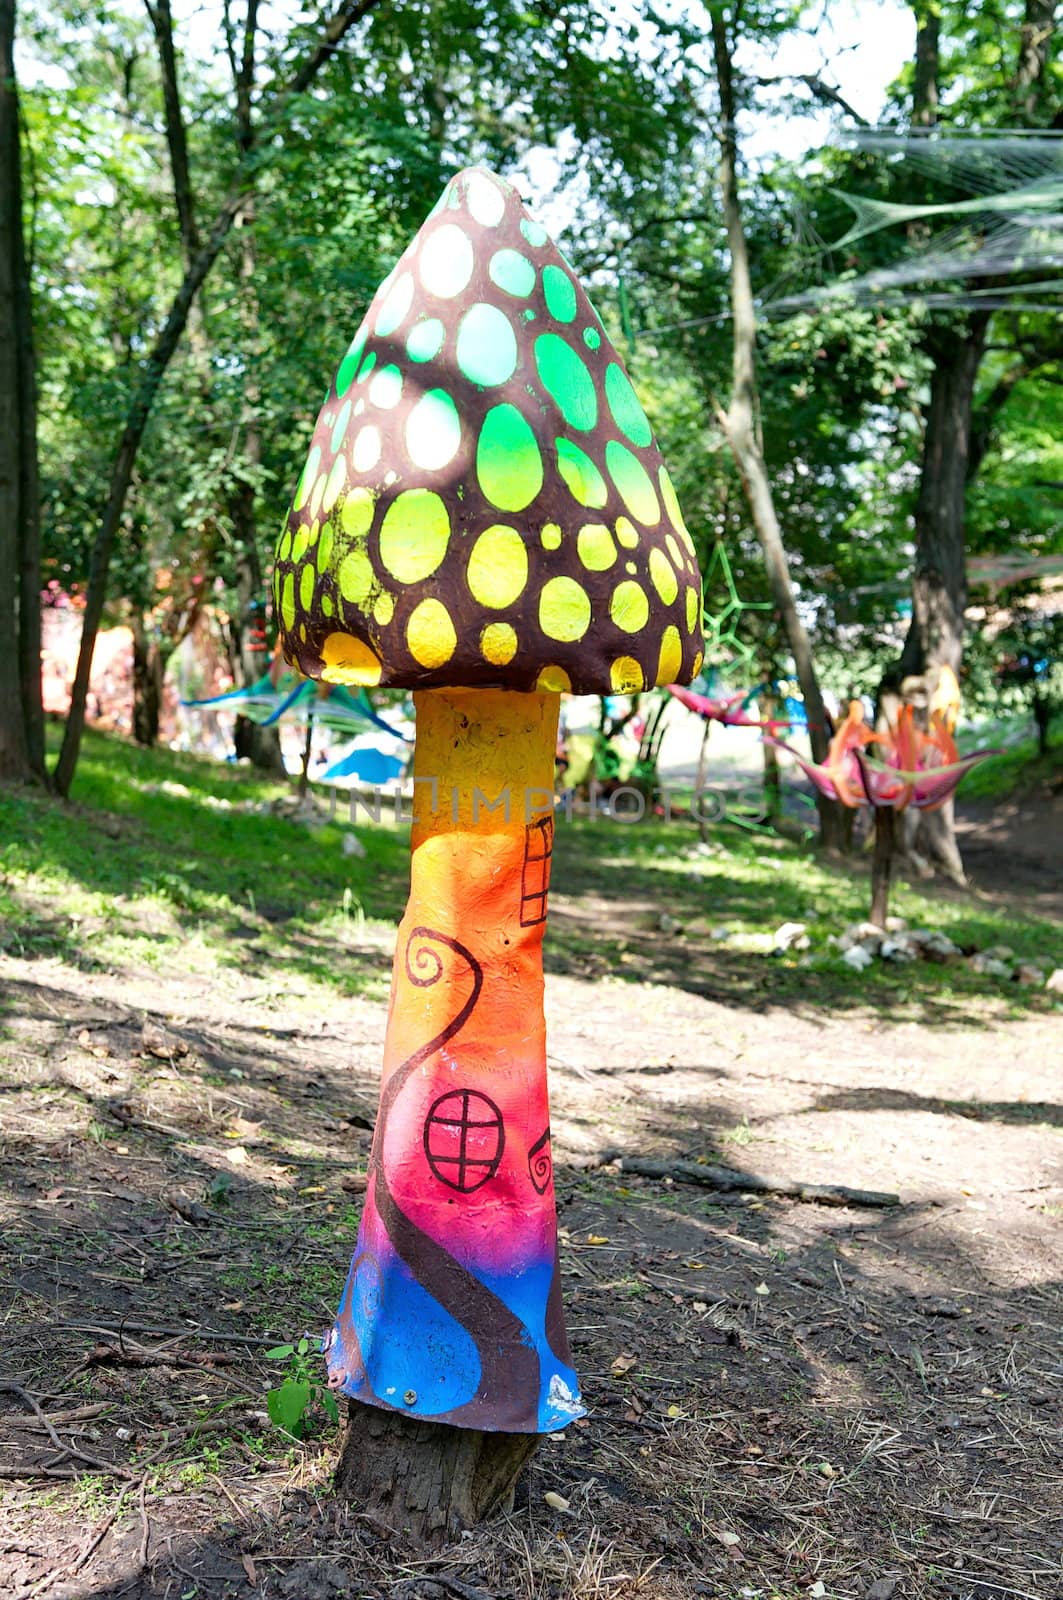 OZORA, HUNGARY - AUGUST 01: Contemporary art on Ozora Festival, one of the greatest psychedelic music gathering in Euorpe. Ozora, Hungary, Europe August 01, 2014.